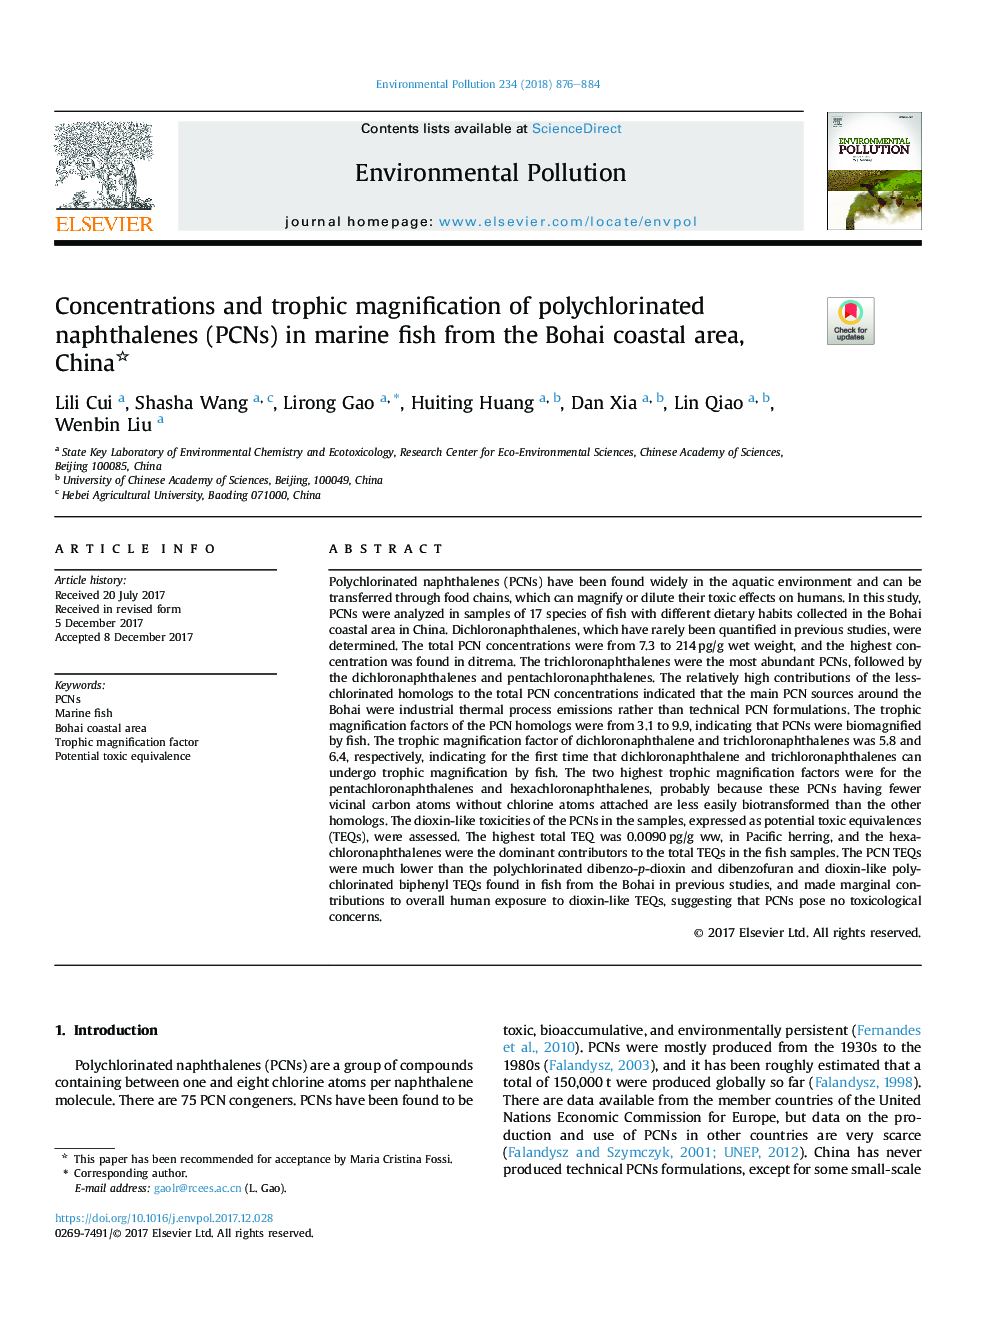 Concentrations and trophic magnification of polychlorinated naphthalenes (PCNs) in marine fish from the Bohai coastal area, China